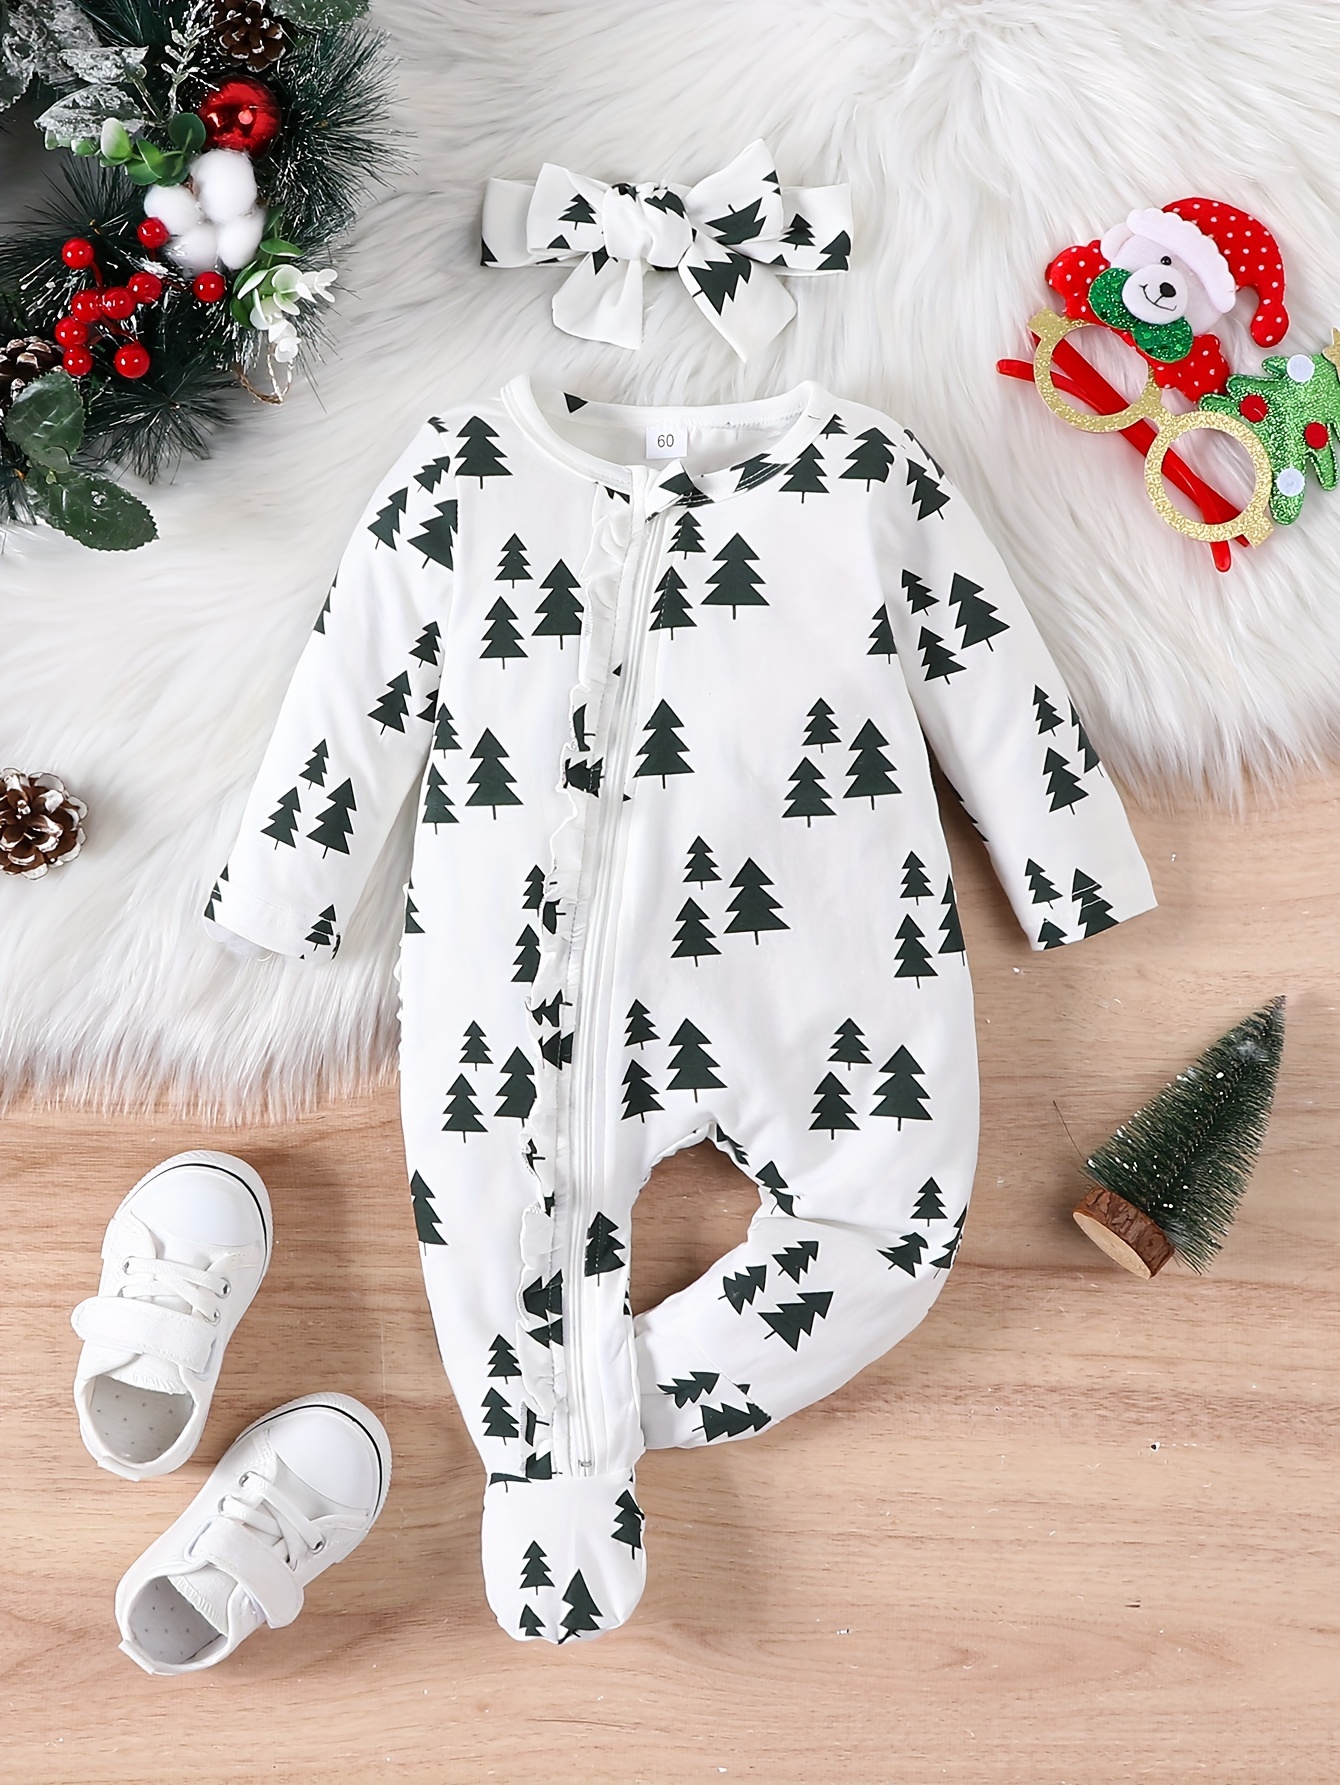 Christmas Deer Embroidered Red Striped Baby Boy/Girl Long-sleeve Cotton Jumpsuit